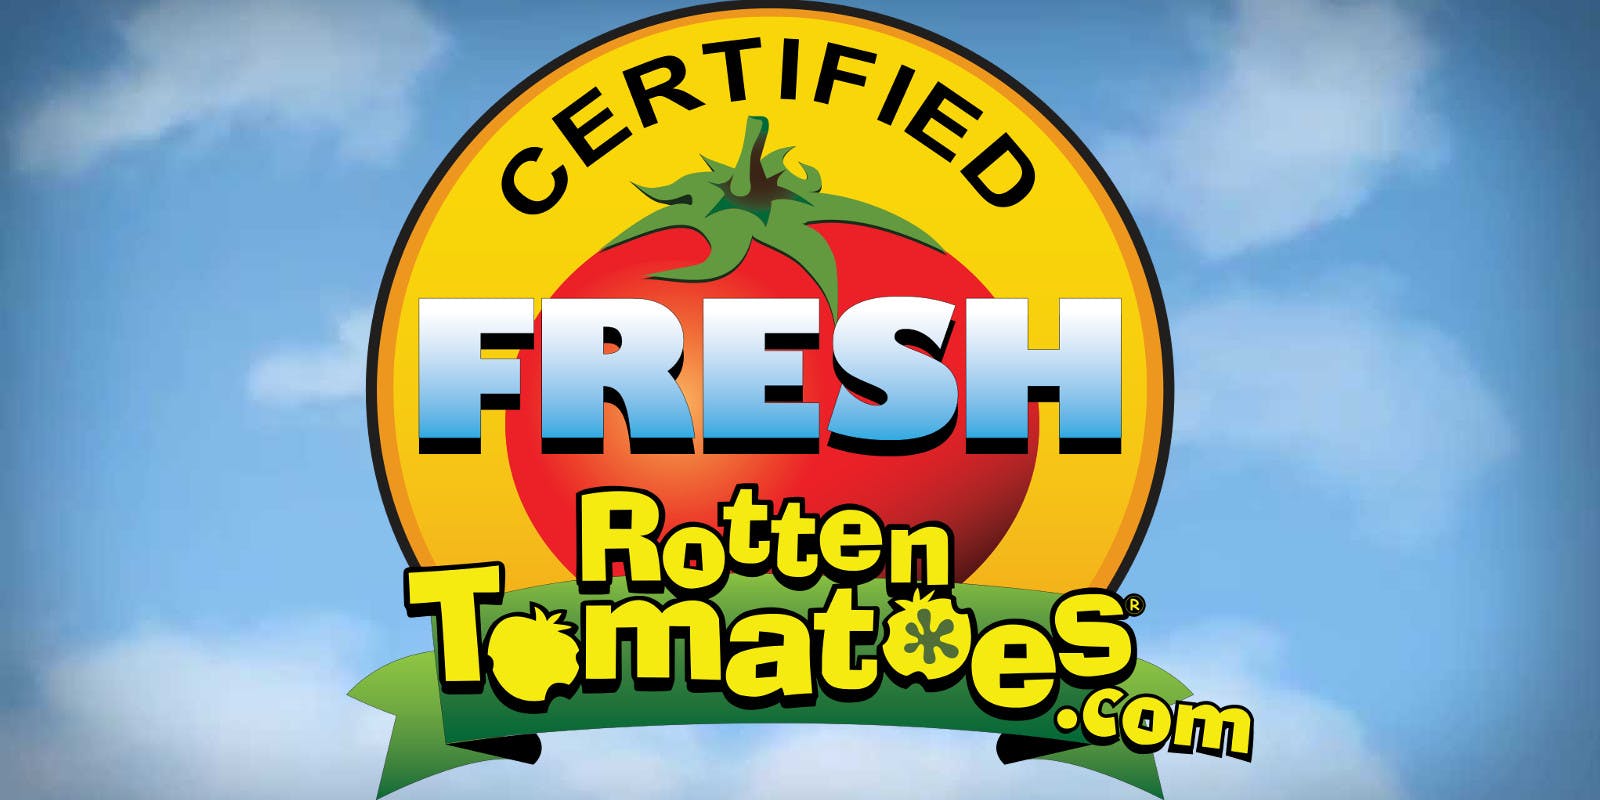 Is rotten tomatoes destroying hollywood?